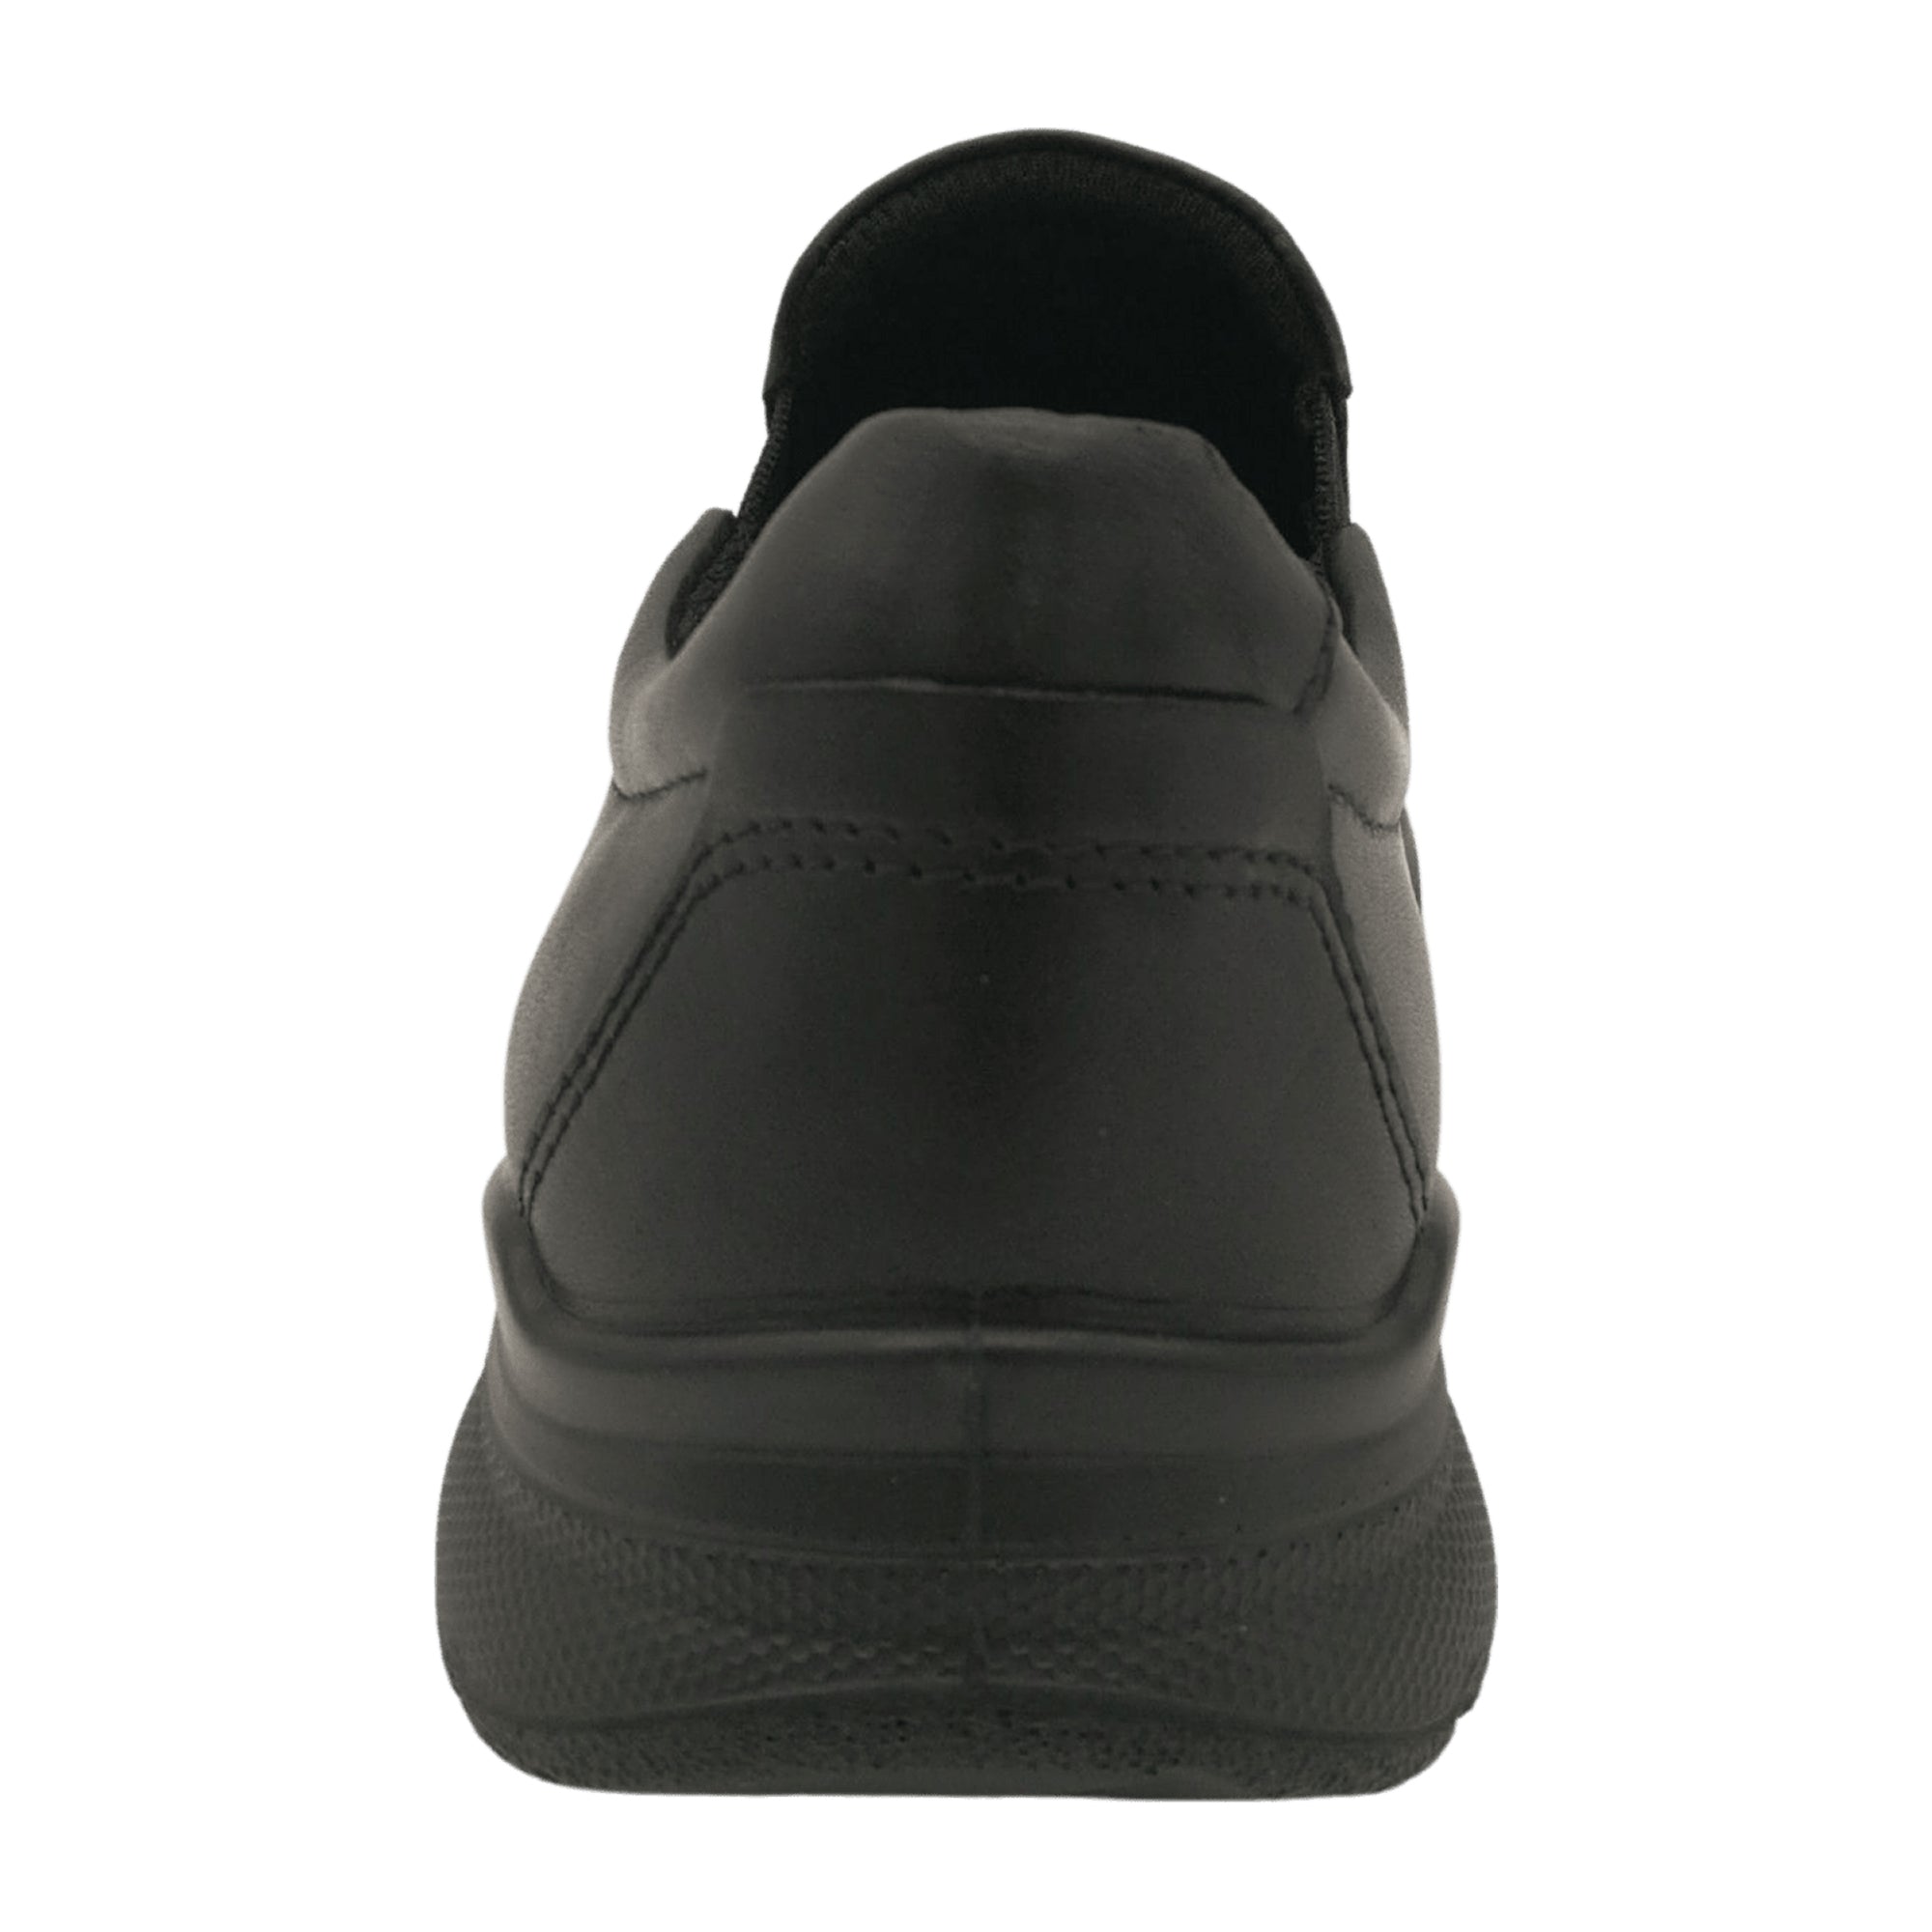 Ecco Irving Men's Black Casual Shoes - Durable & Stylish